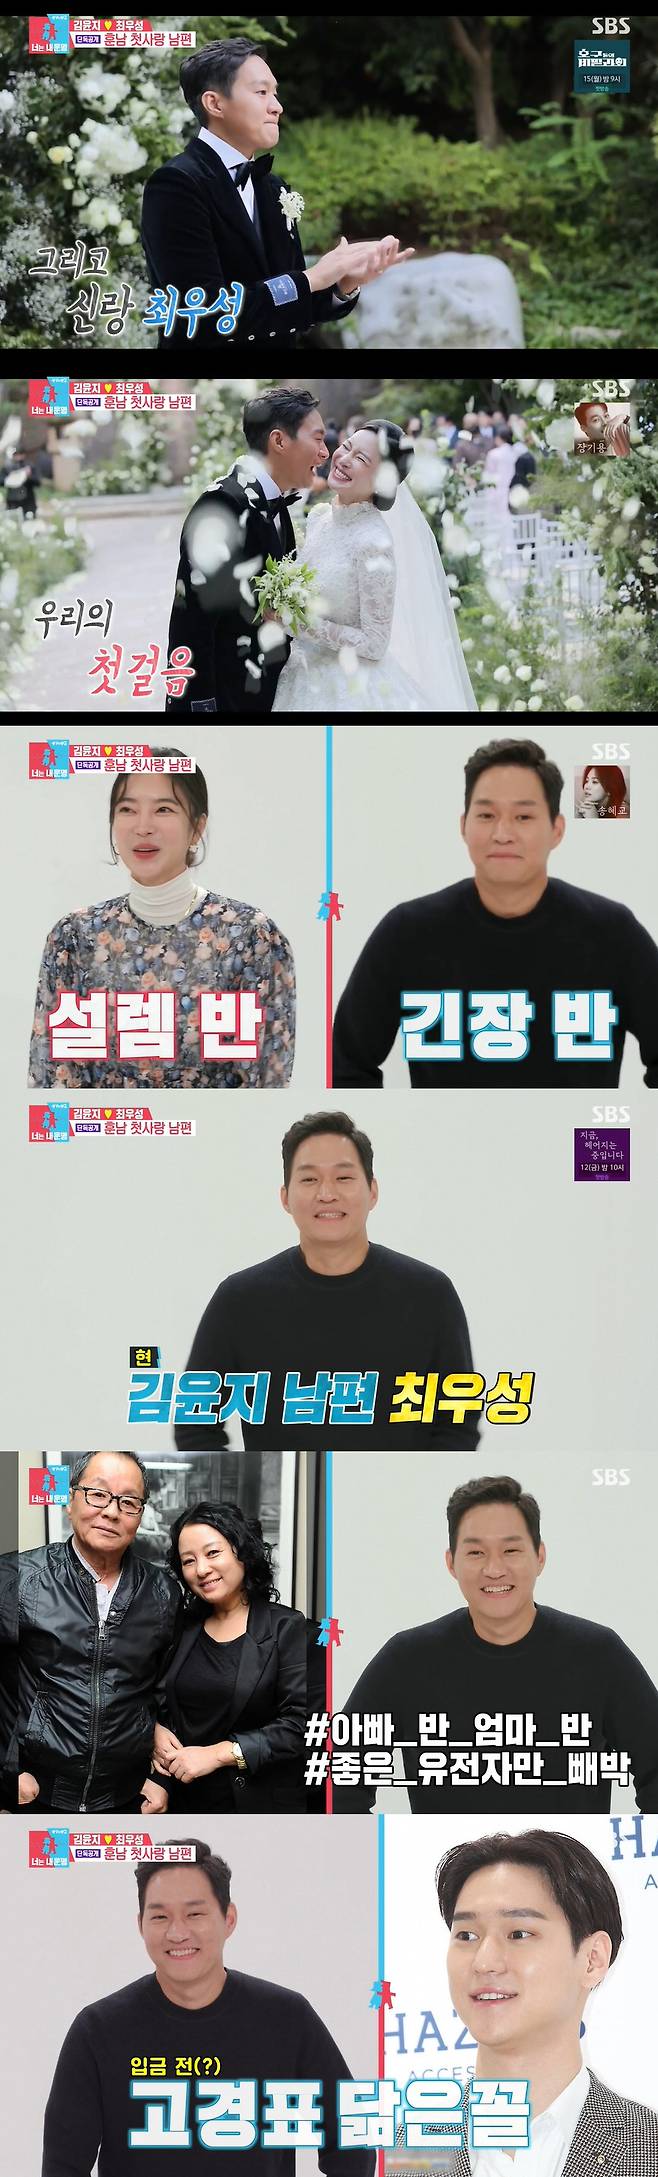 Husband Choi Woo-sung of actor Kim Yoon-ji boasted a warm-looking appearance resembling Go Kyung-pyo.On SBS Same Bed, Different Dreams 2 Season 2 - You Are My Destiny (hereinafter referred to as Same Bed, Different Dreams 22), the daily life of Kim Yoon-ji Choi Woo-sung, who joined the new fate couple, was revealed for the first time.Kim Yoon-ji introduced Husband as the person who made confession first and Proposal first.Kim Yoon-jis Handsome boy Husband Choi Woo-sung appeared.He said, It is strange, Kim Young-im is said to be Choi Woo-sung who came to see Kim Yoon-jis Husband.Choi Woo-sung, who is 5 years older than Kim Yoon-ji, is 39 years old this year and is currently working as a performance YG Entertainment.In Choi Woo-sungs warm visual, Lee Ji-hye admired Handsome boy, and Kim Gura praised handsome handsome.Seo Jang-hoon also said, There is a feeling of Go Kyung-pyo. Kim Yoon-ji added, Go Kyung-pyo before depositing.